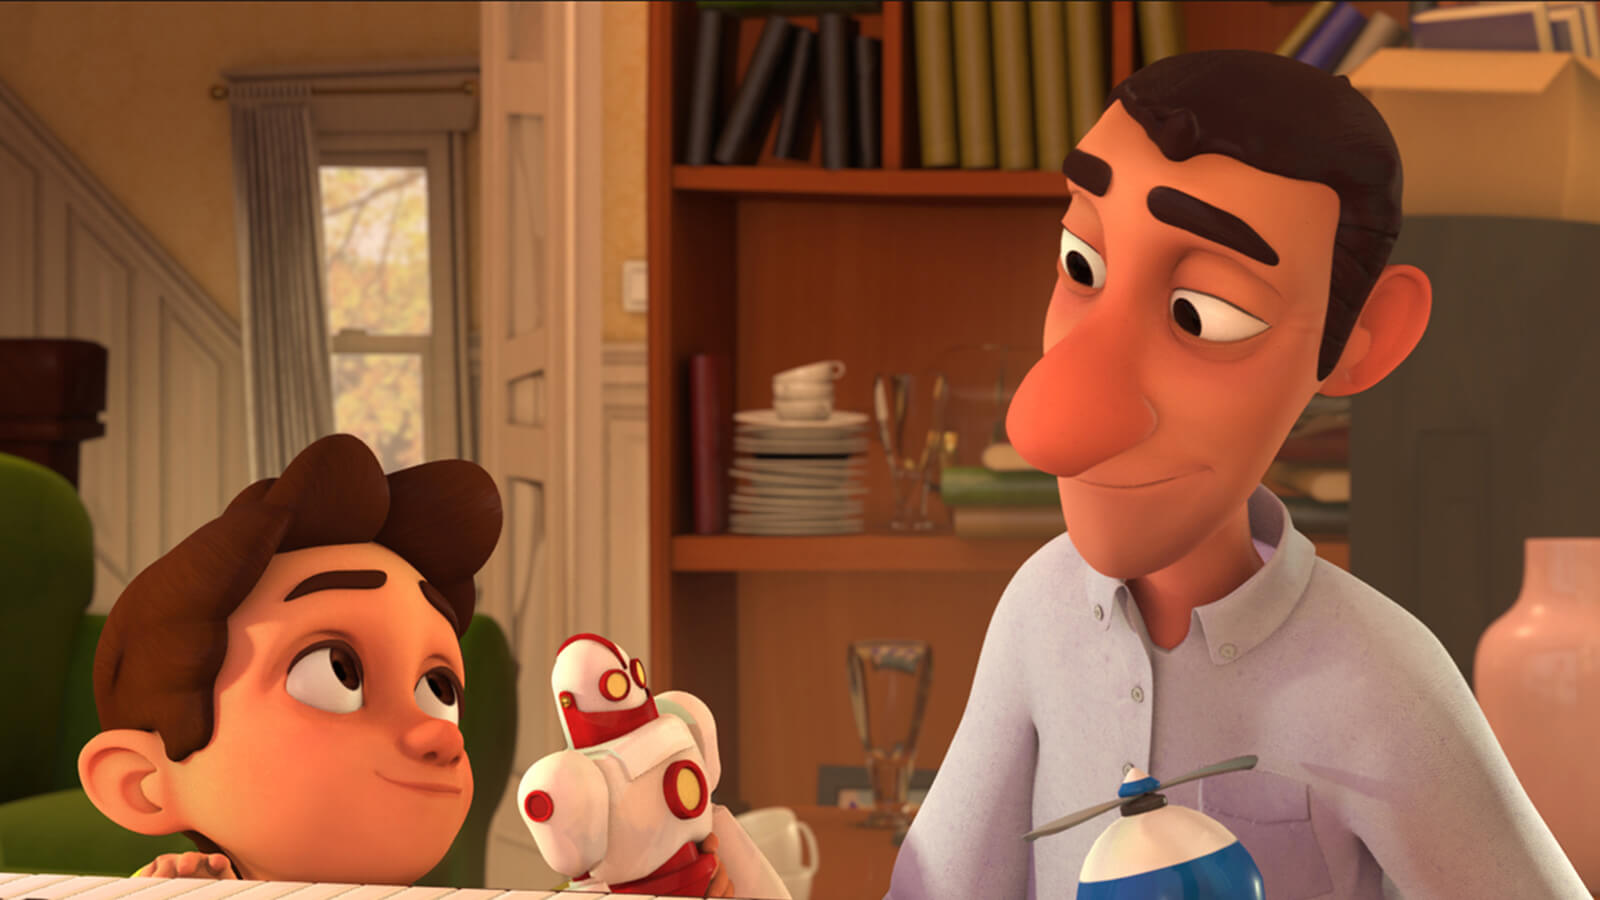 A man and boy in a house look at each other while holding red-white and blue-white plastic toys